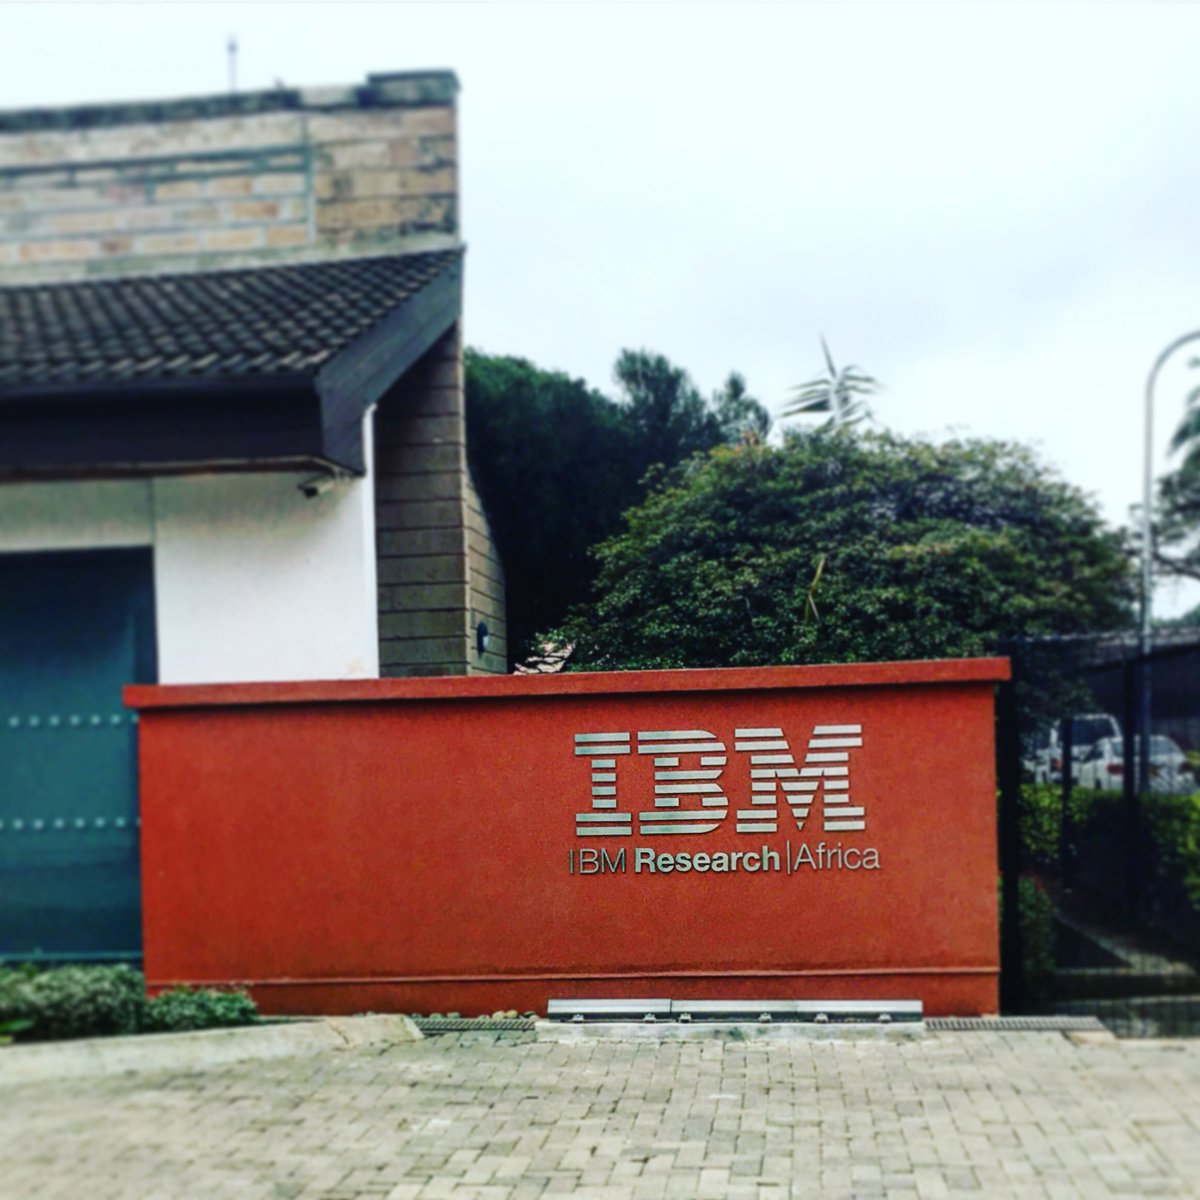 Super excited to join the Healthcare Team at @IBMResearch 🇰🇪 🔬.
Amazing lab 🤩, amazing scientists & engineers! 🤯👩‍💻👨‍⚕️👩‍🔬 #nairobi  #kenya #researchScientist #computerscience